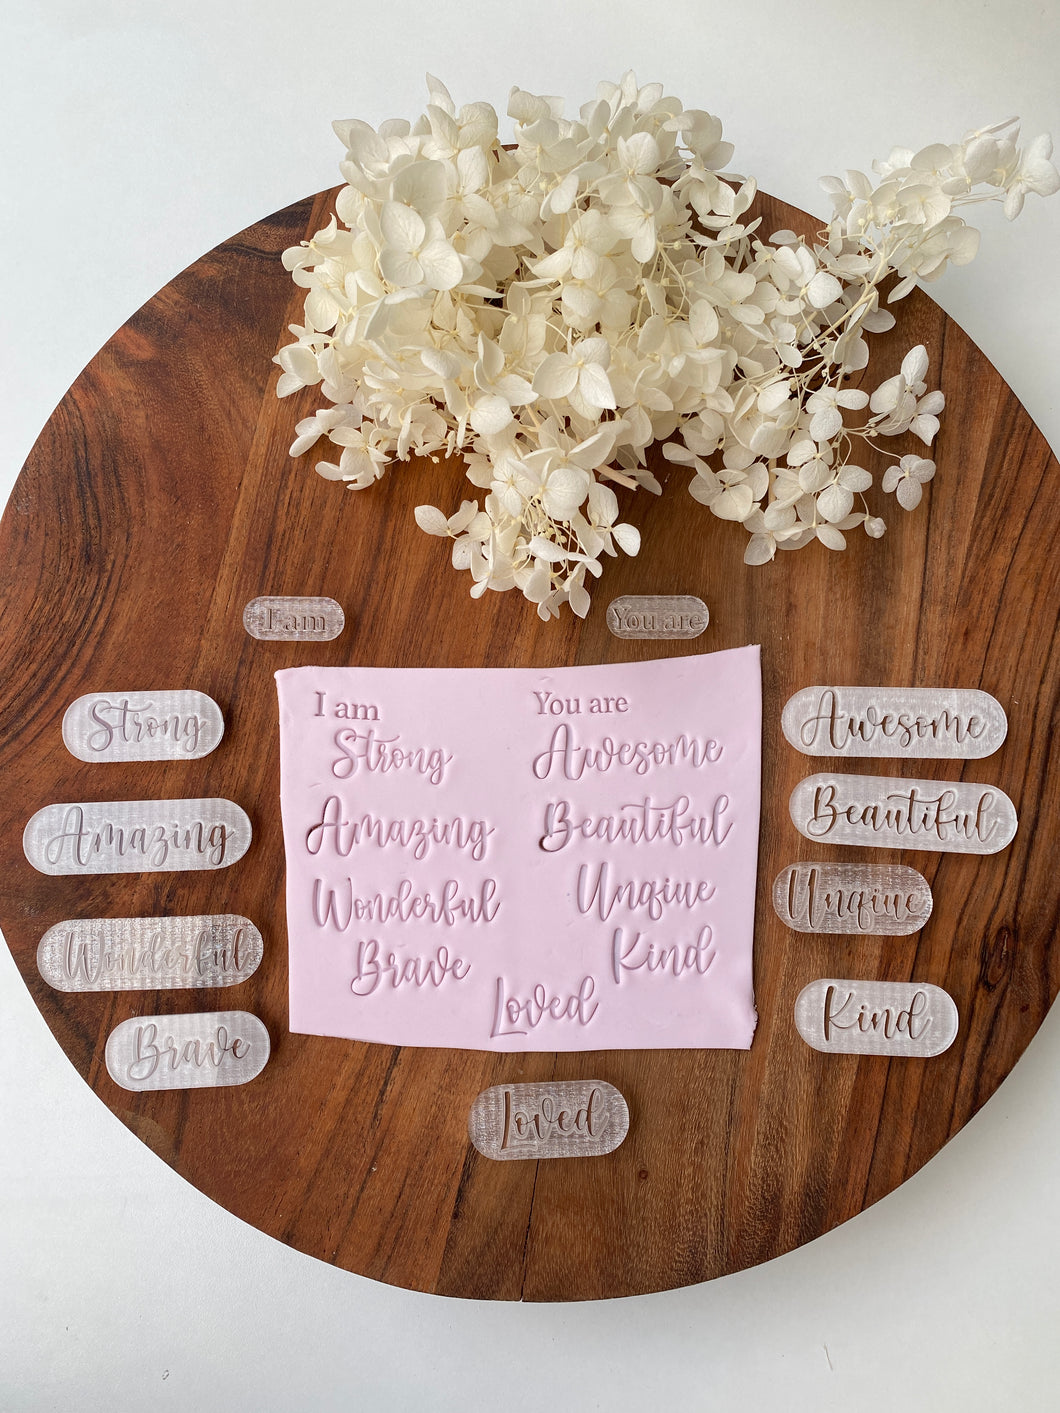 Affirmation Wordings impress collection